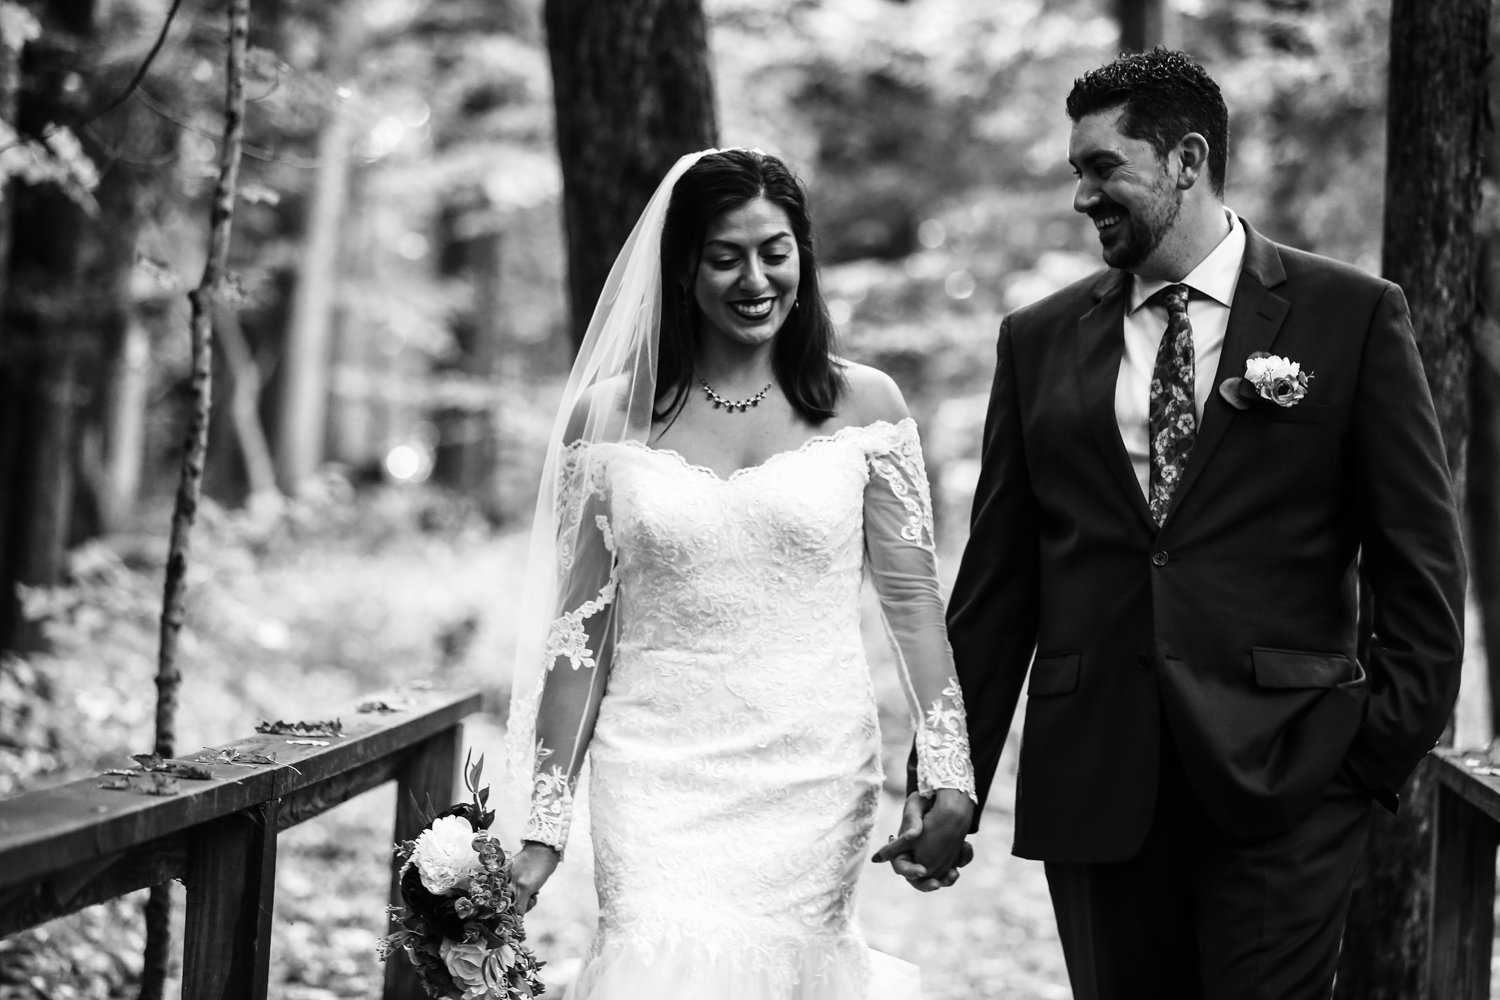 Bride and groom walk hand in hand for bridal portraits at their Headwaters Park wedding